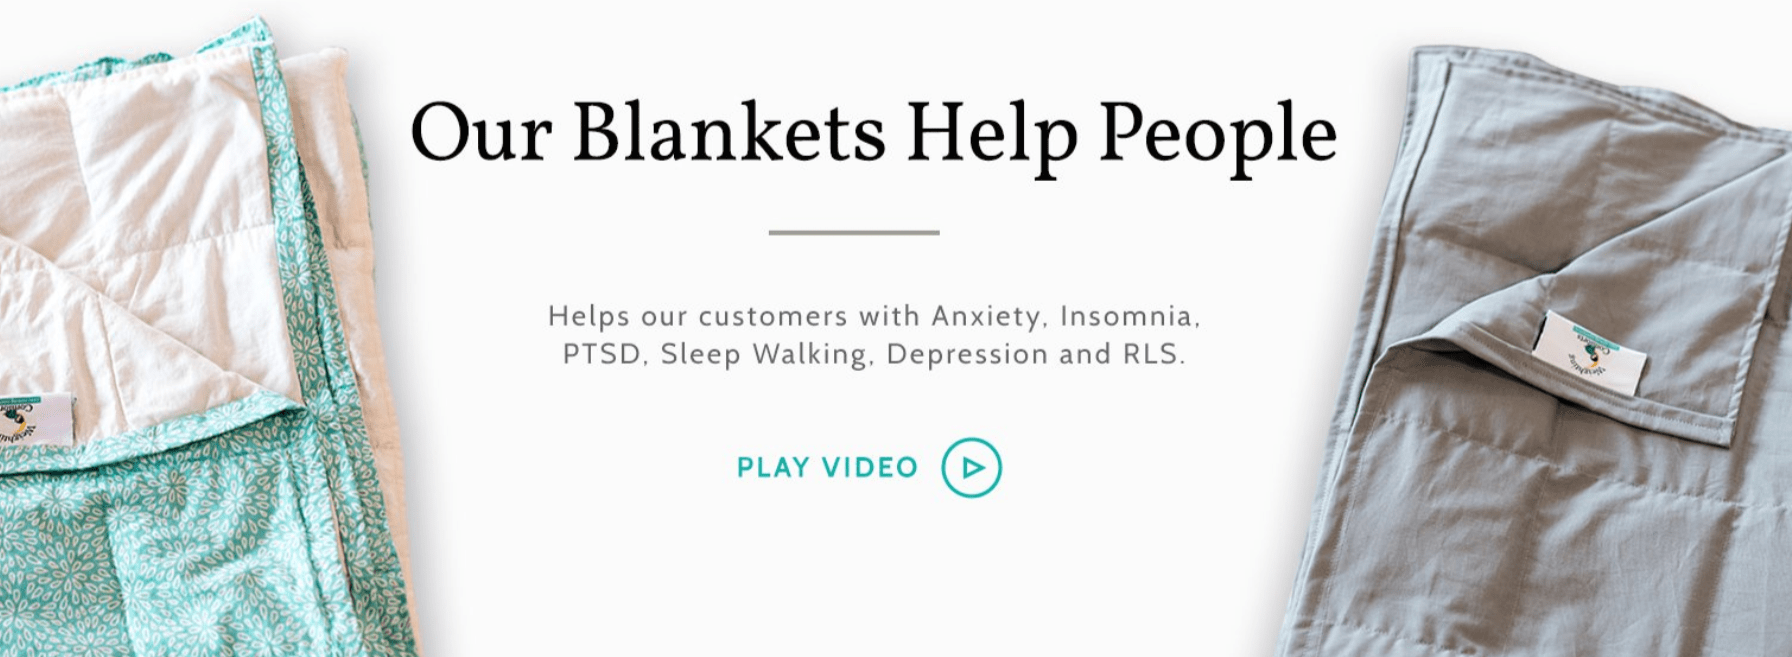 Weighting Comforts Coupon Codes- Blanket That Help People